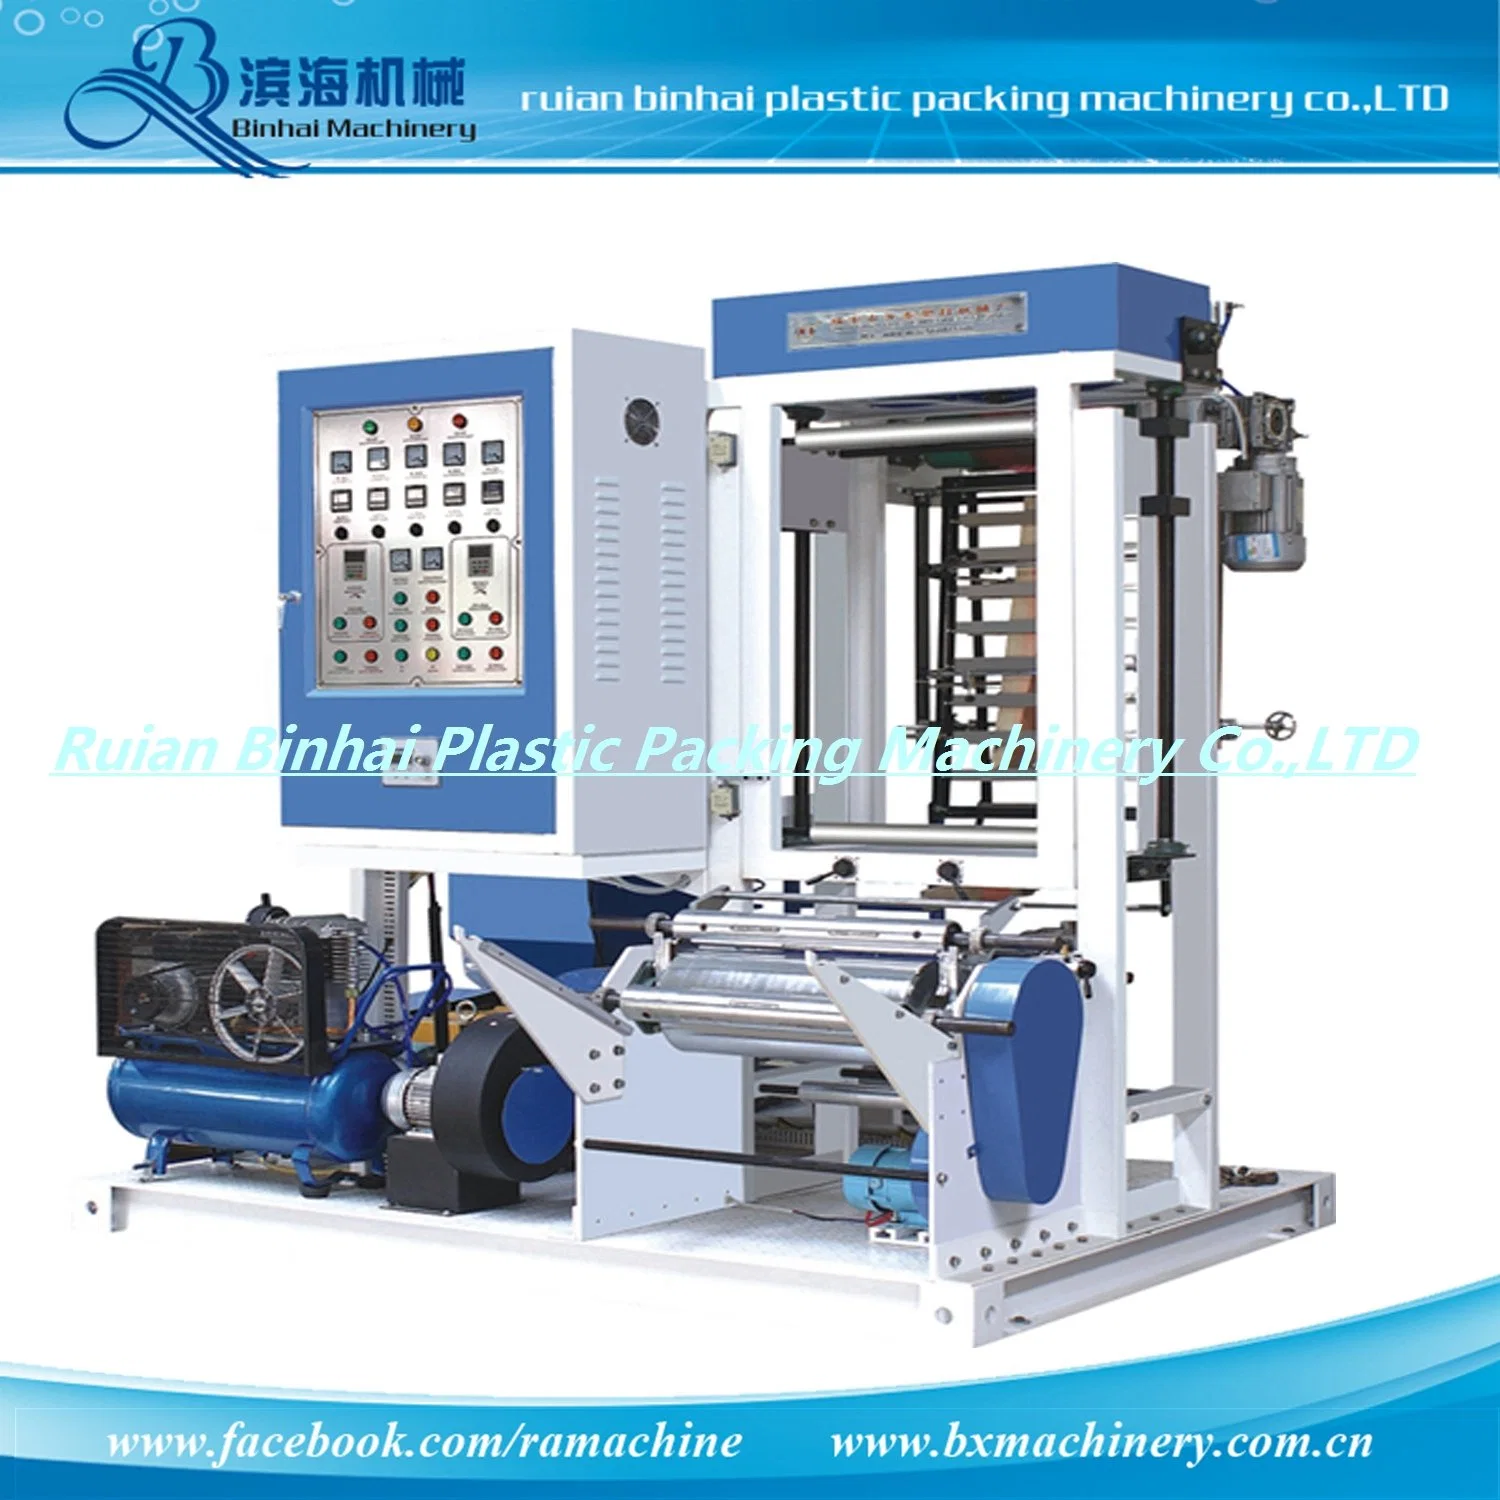 Plastic Film Blowing Machine with Youtube Video